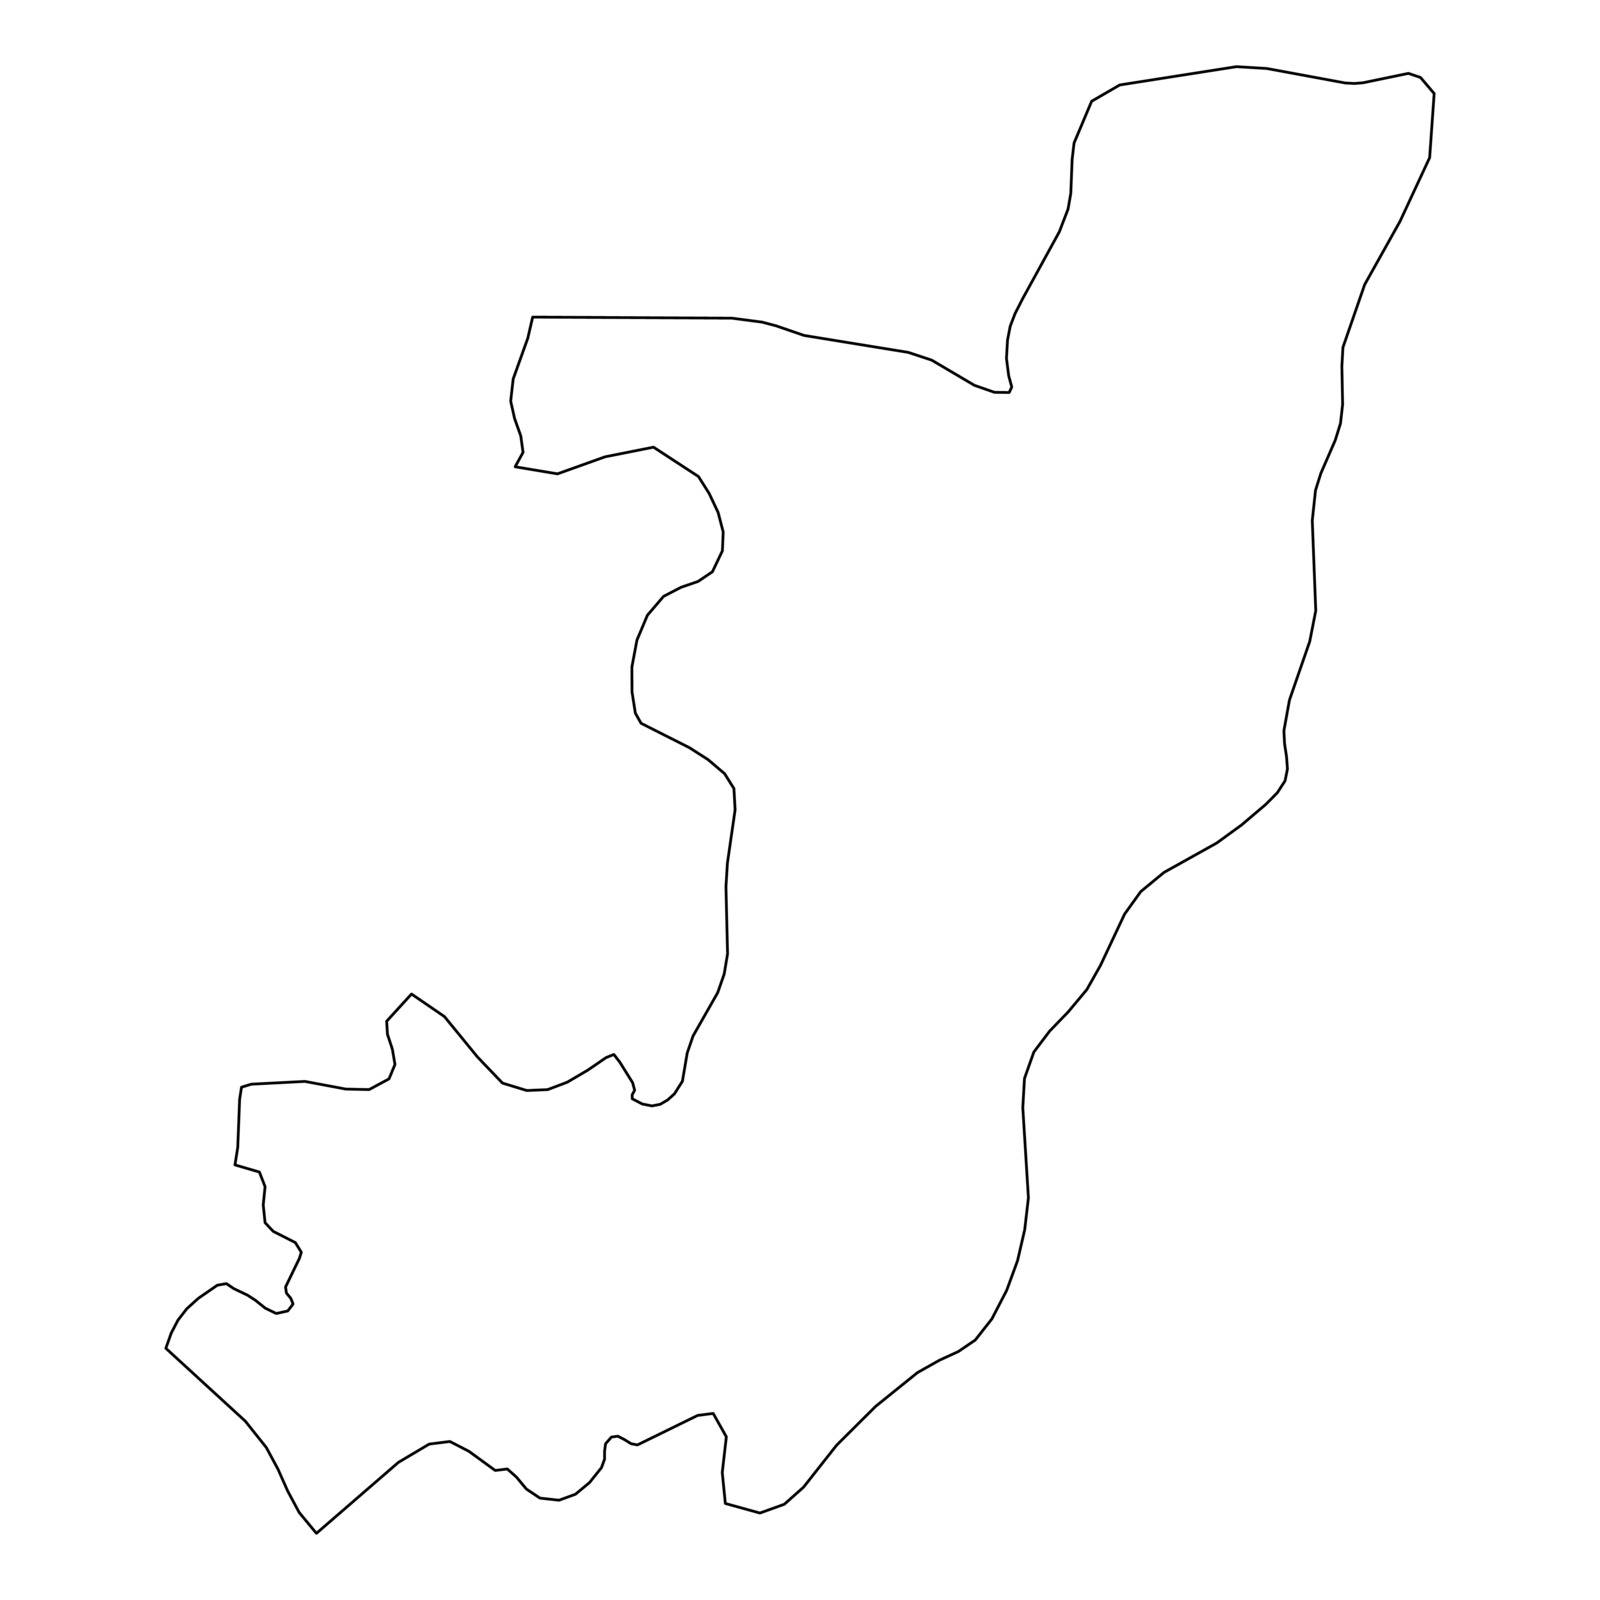 Republic of the Congo, former Zaire - solid black outline border map of country area. Simple flat vector illustration by pyty